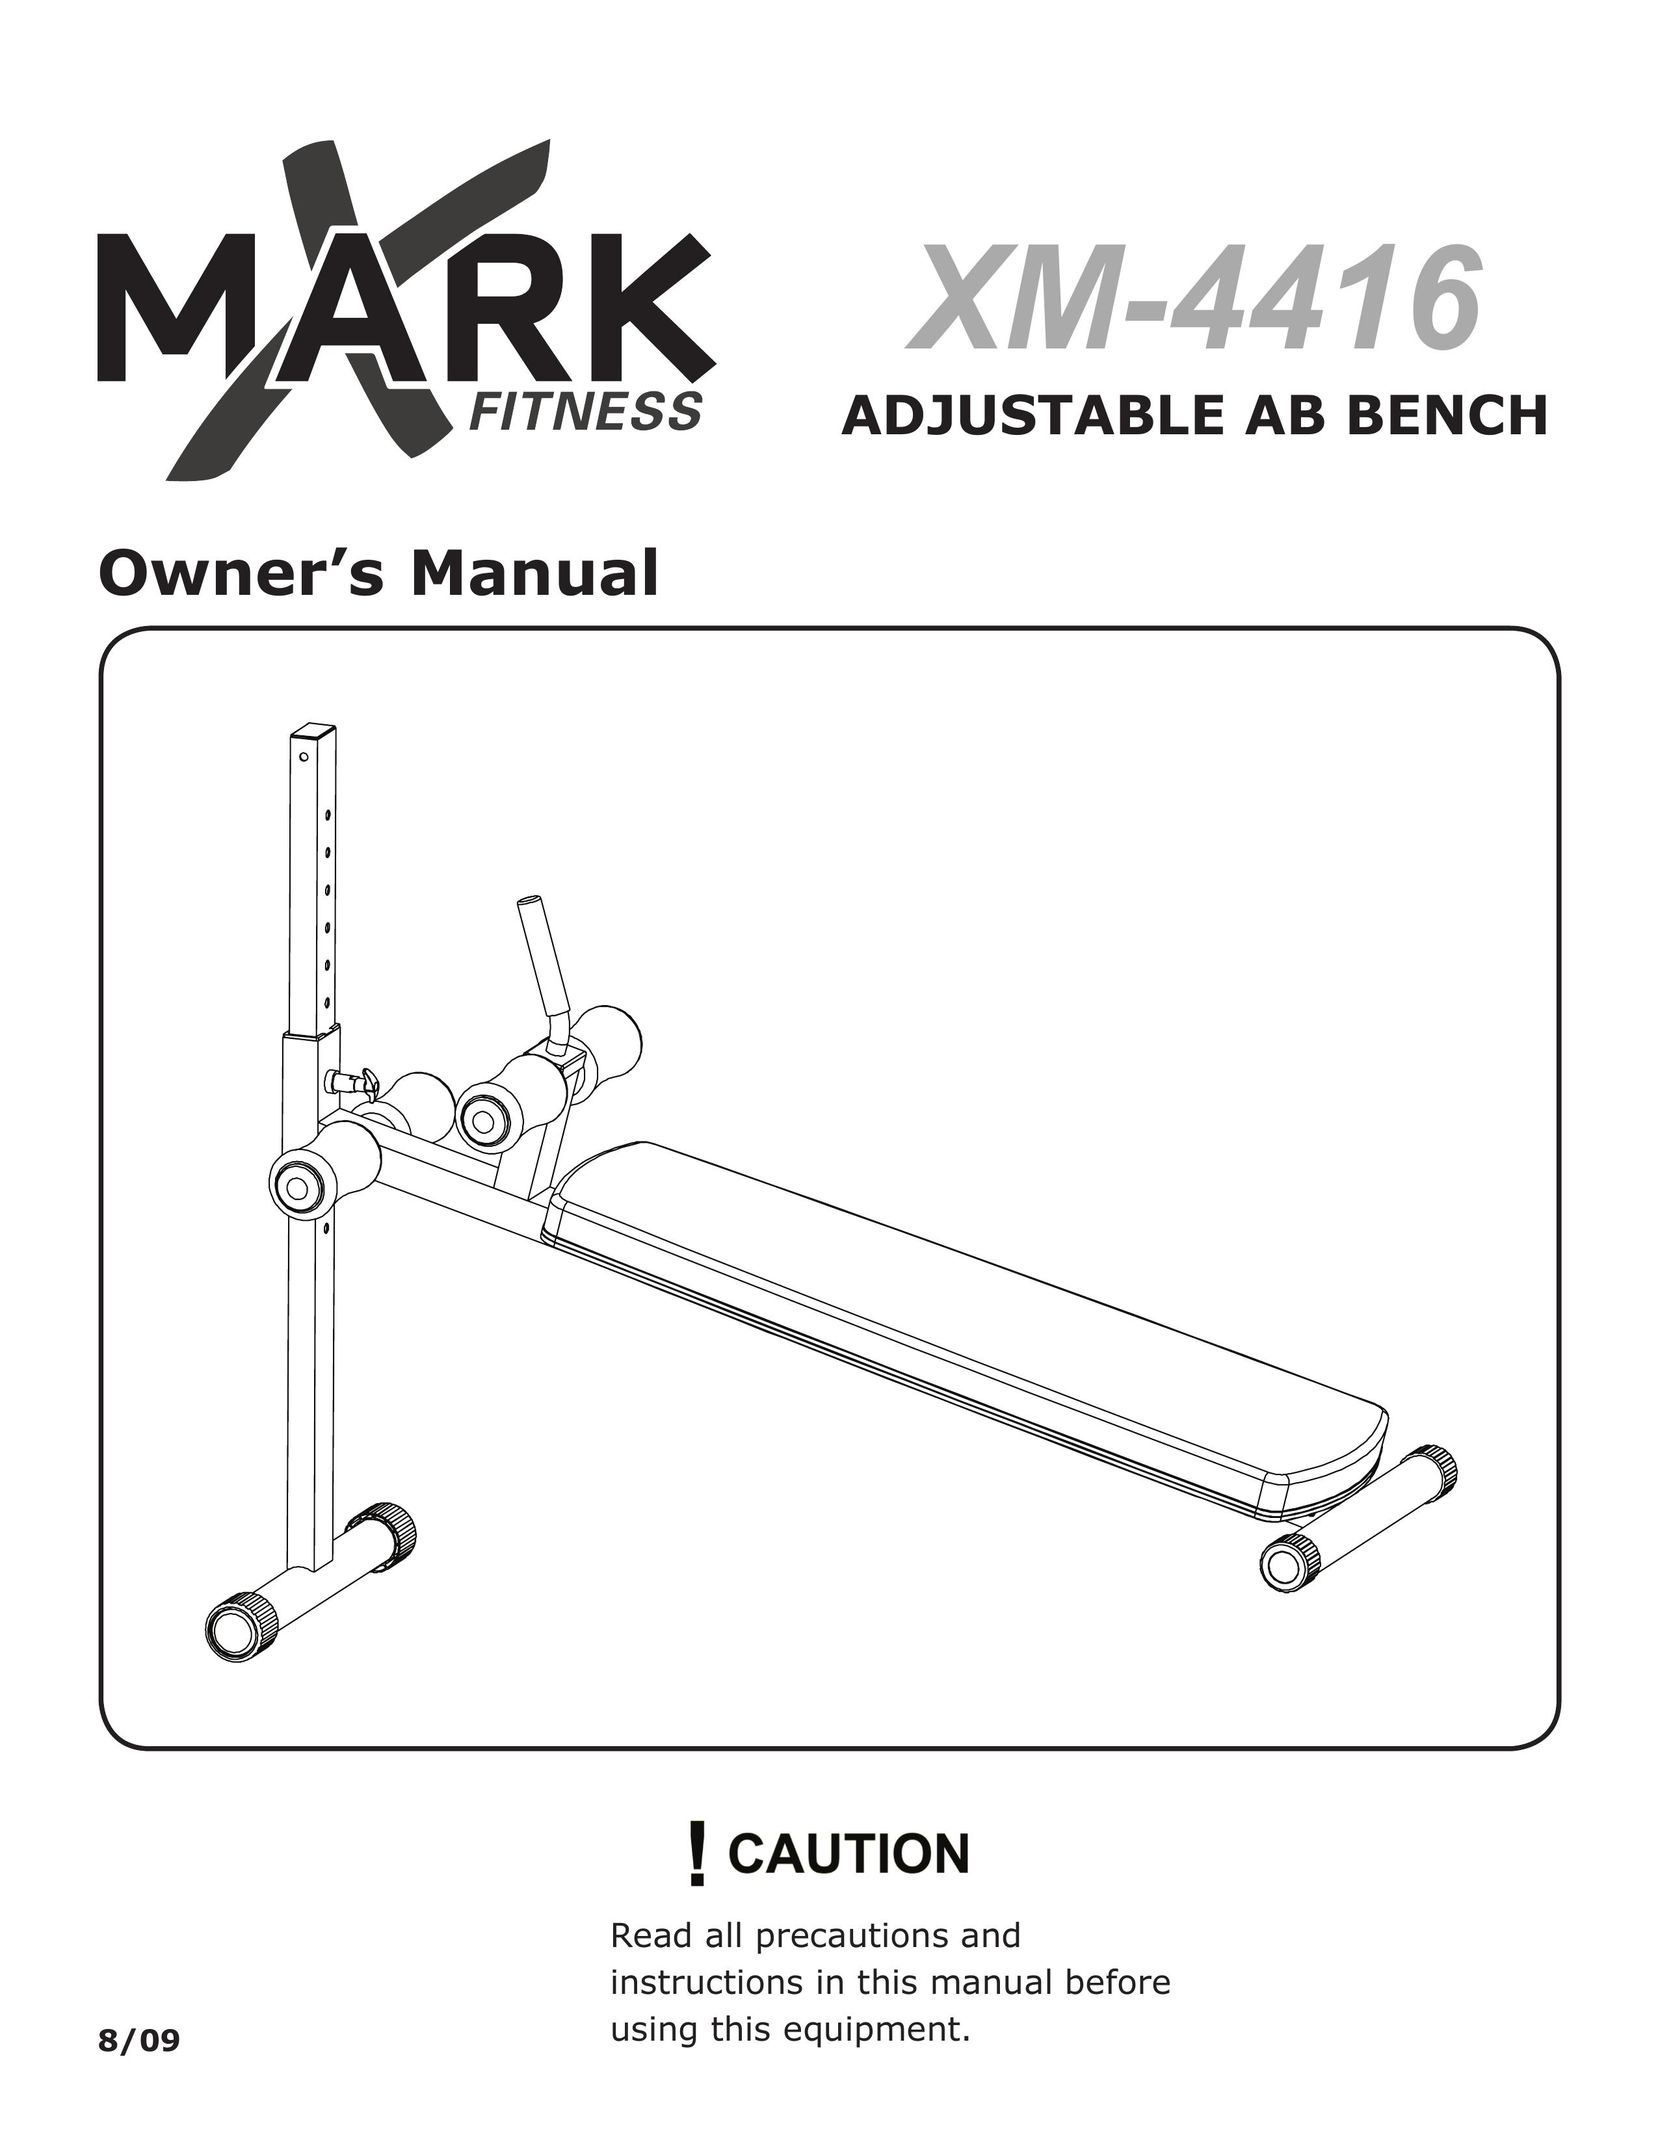 Mark Of Fitness xm-4416 Home Gym User Manual